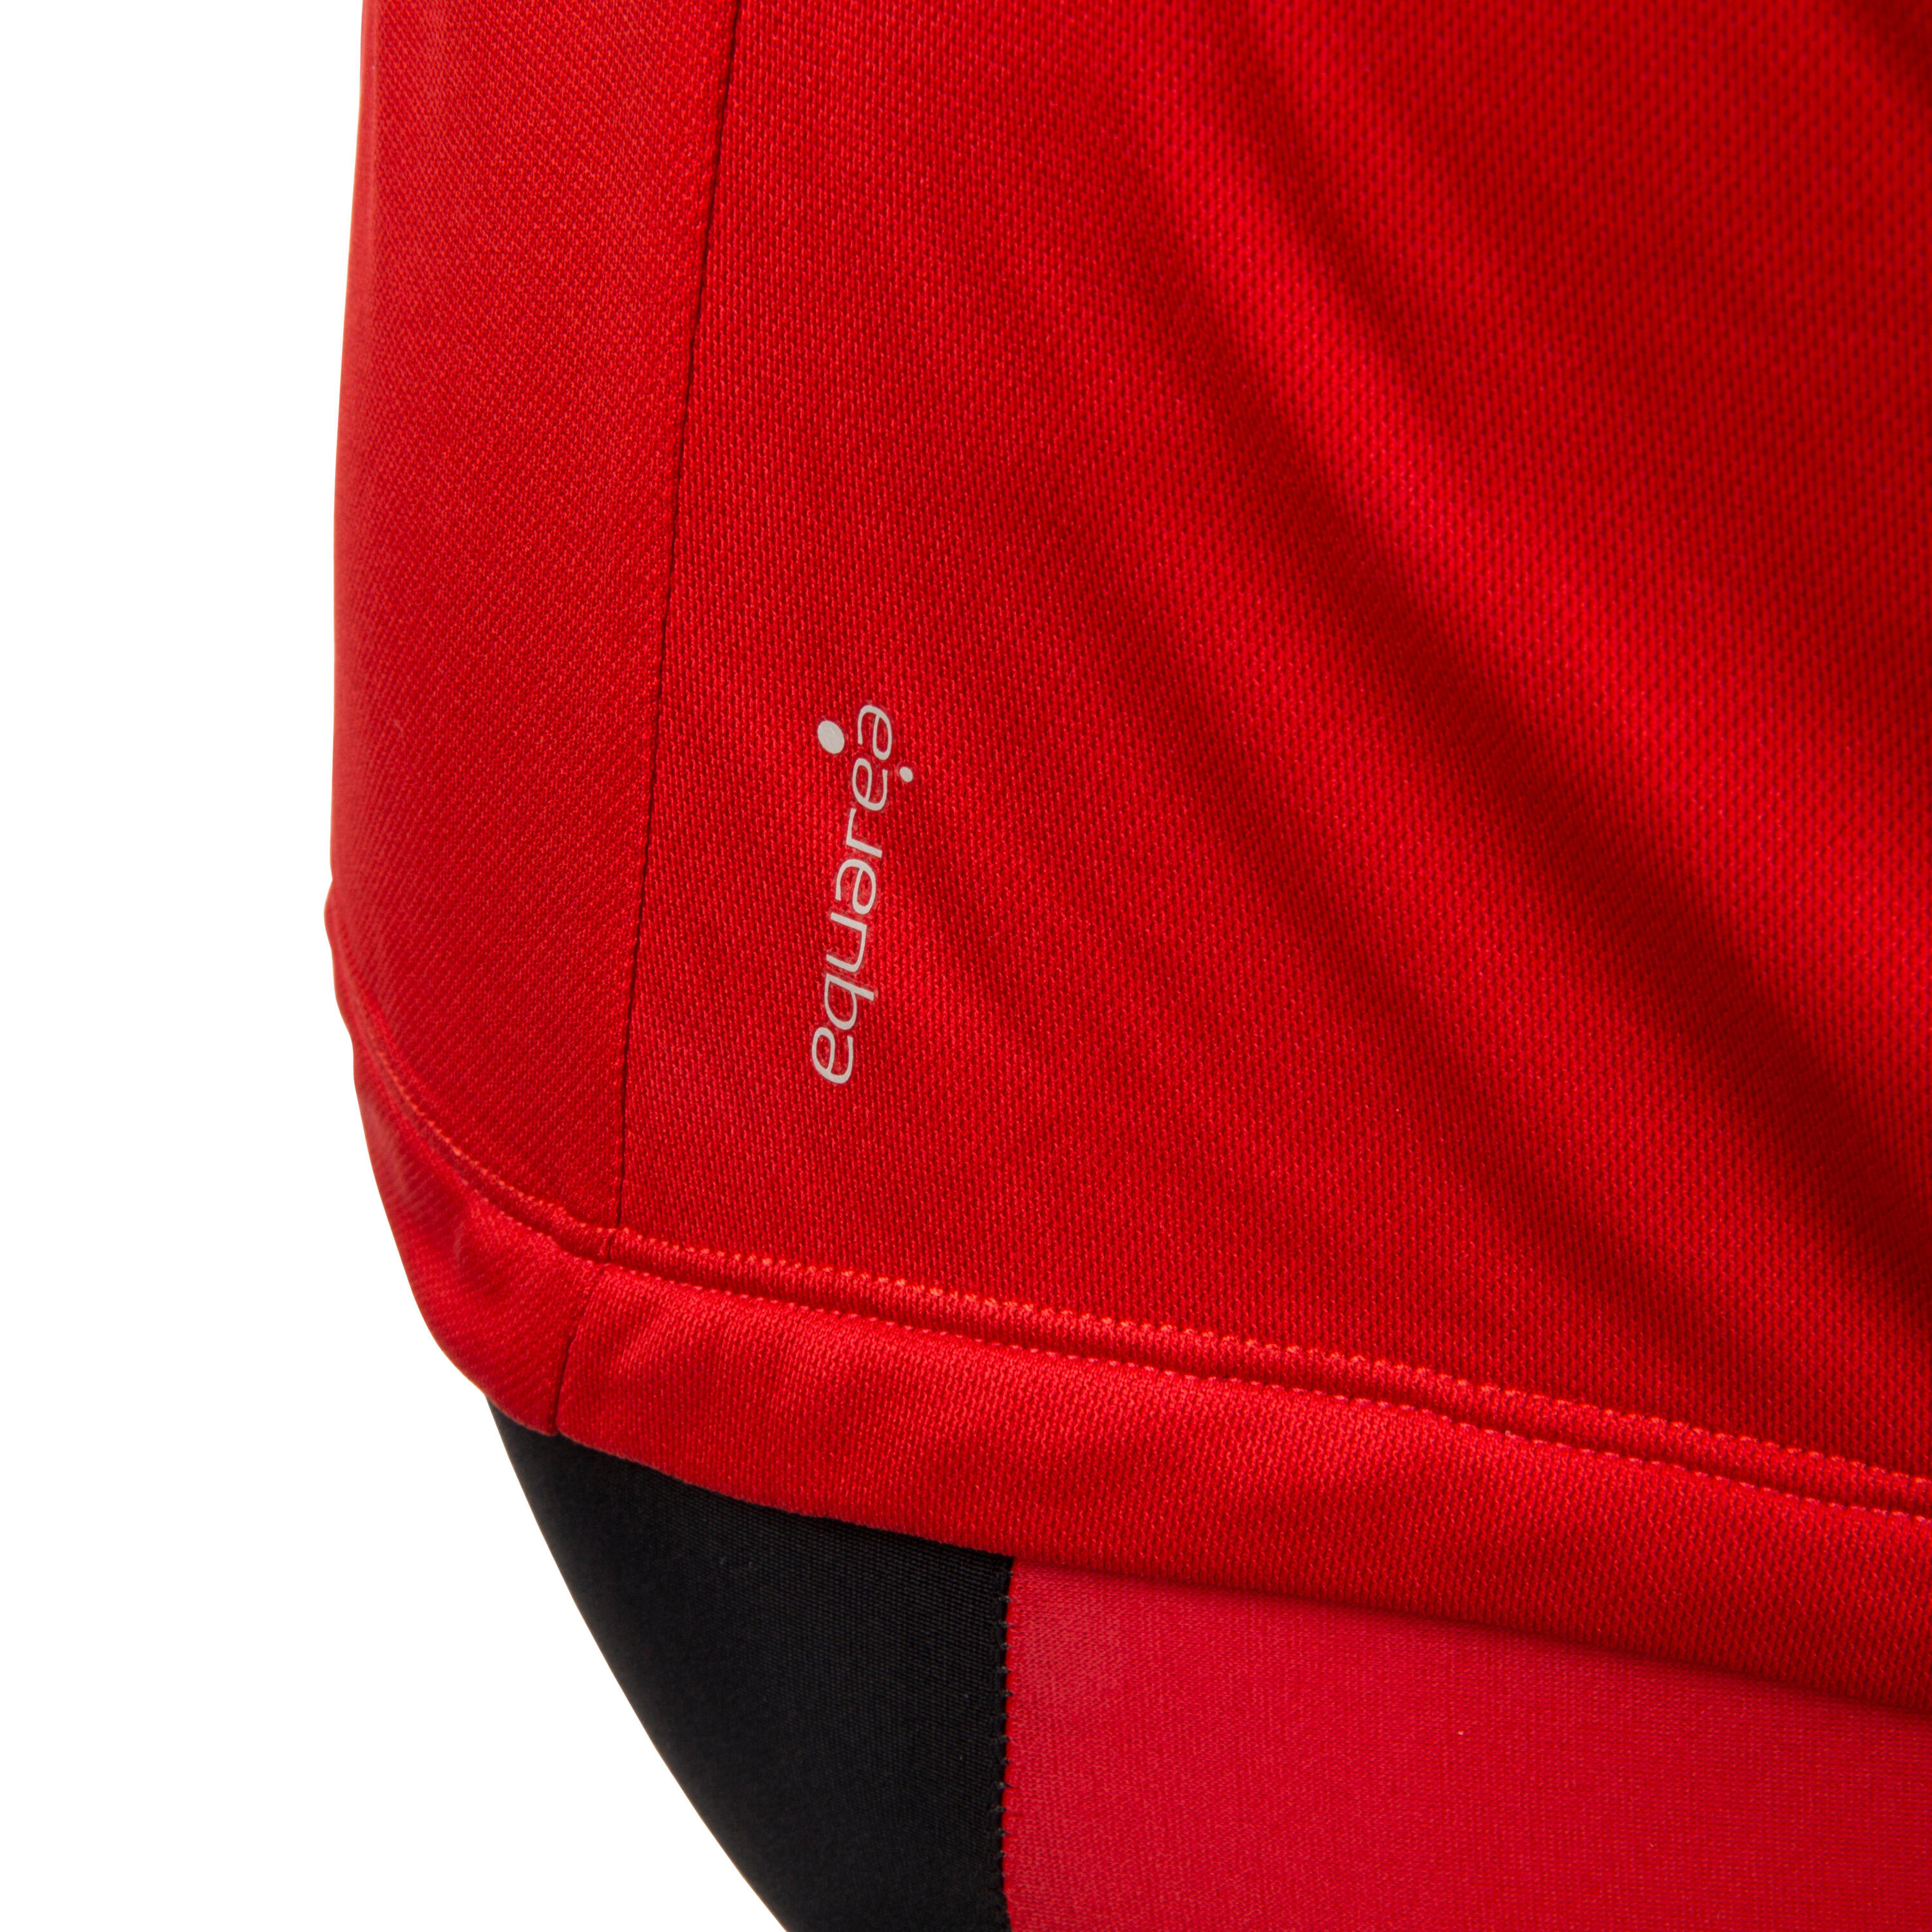 Roadcycling 100 Short-Sleeved Cycling Jersey - Red 8/11